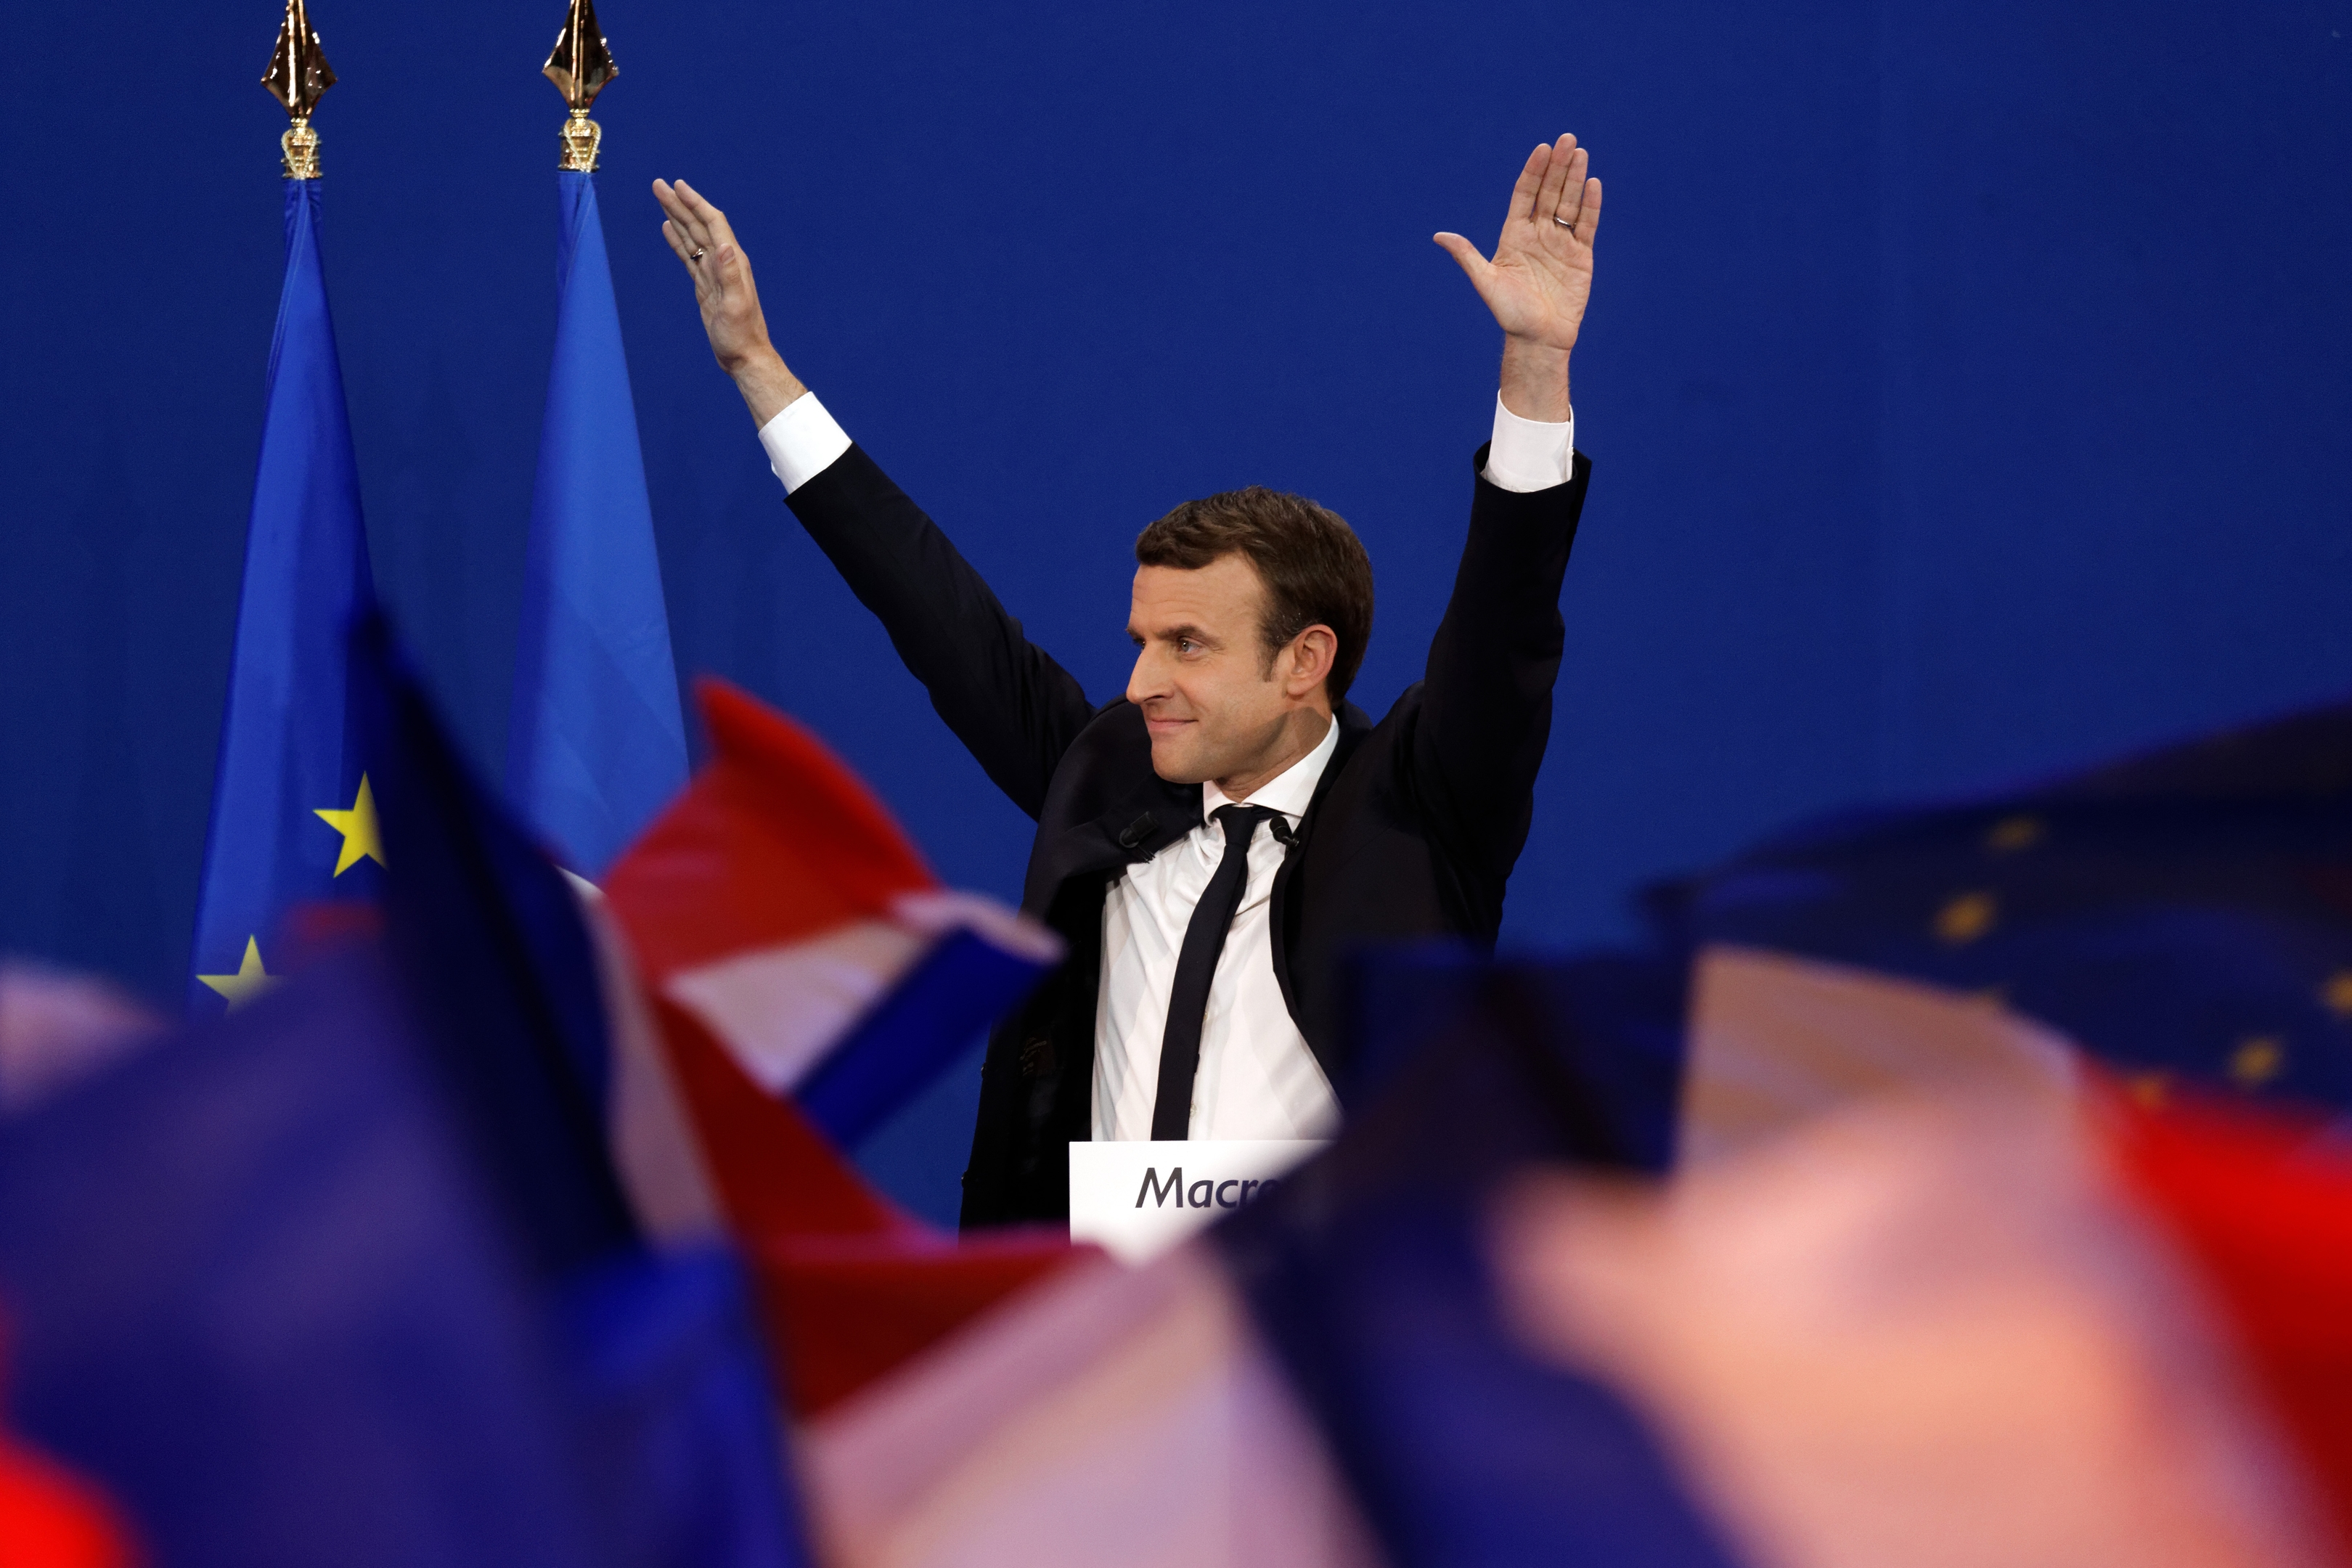 Emmanuel Macron puts his arms up amid French flags